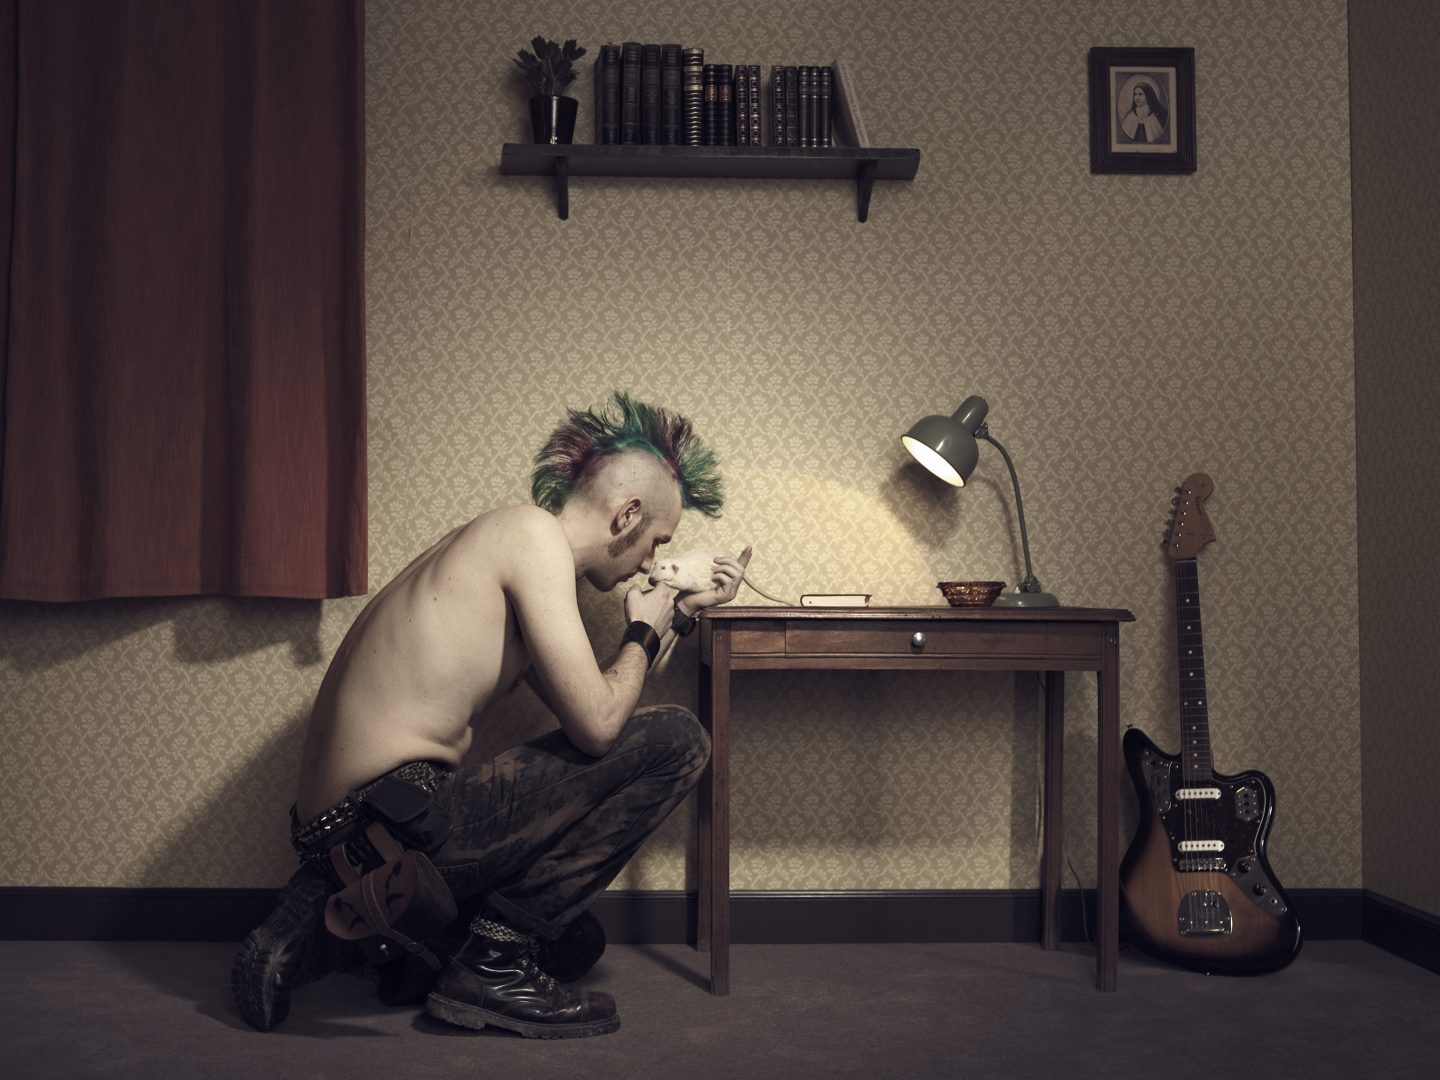 Punk playing with his rat in room 42 by Stefan Rappo